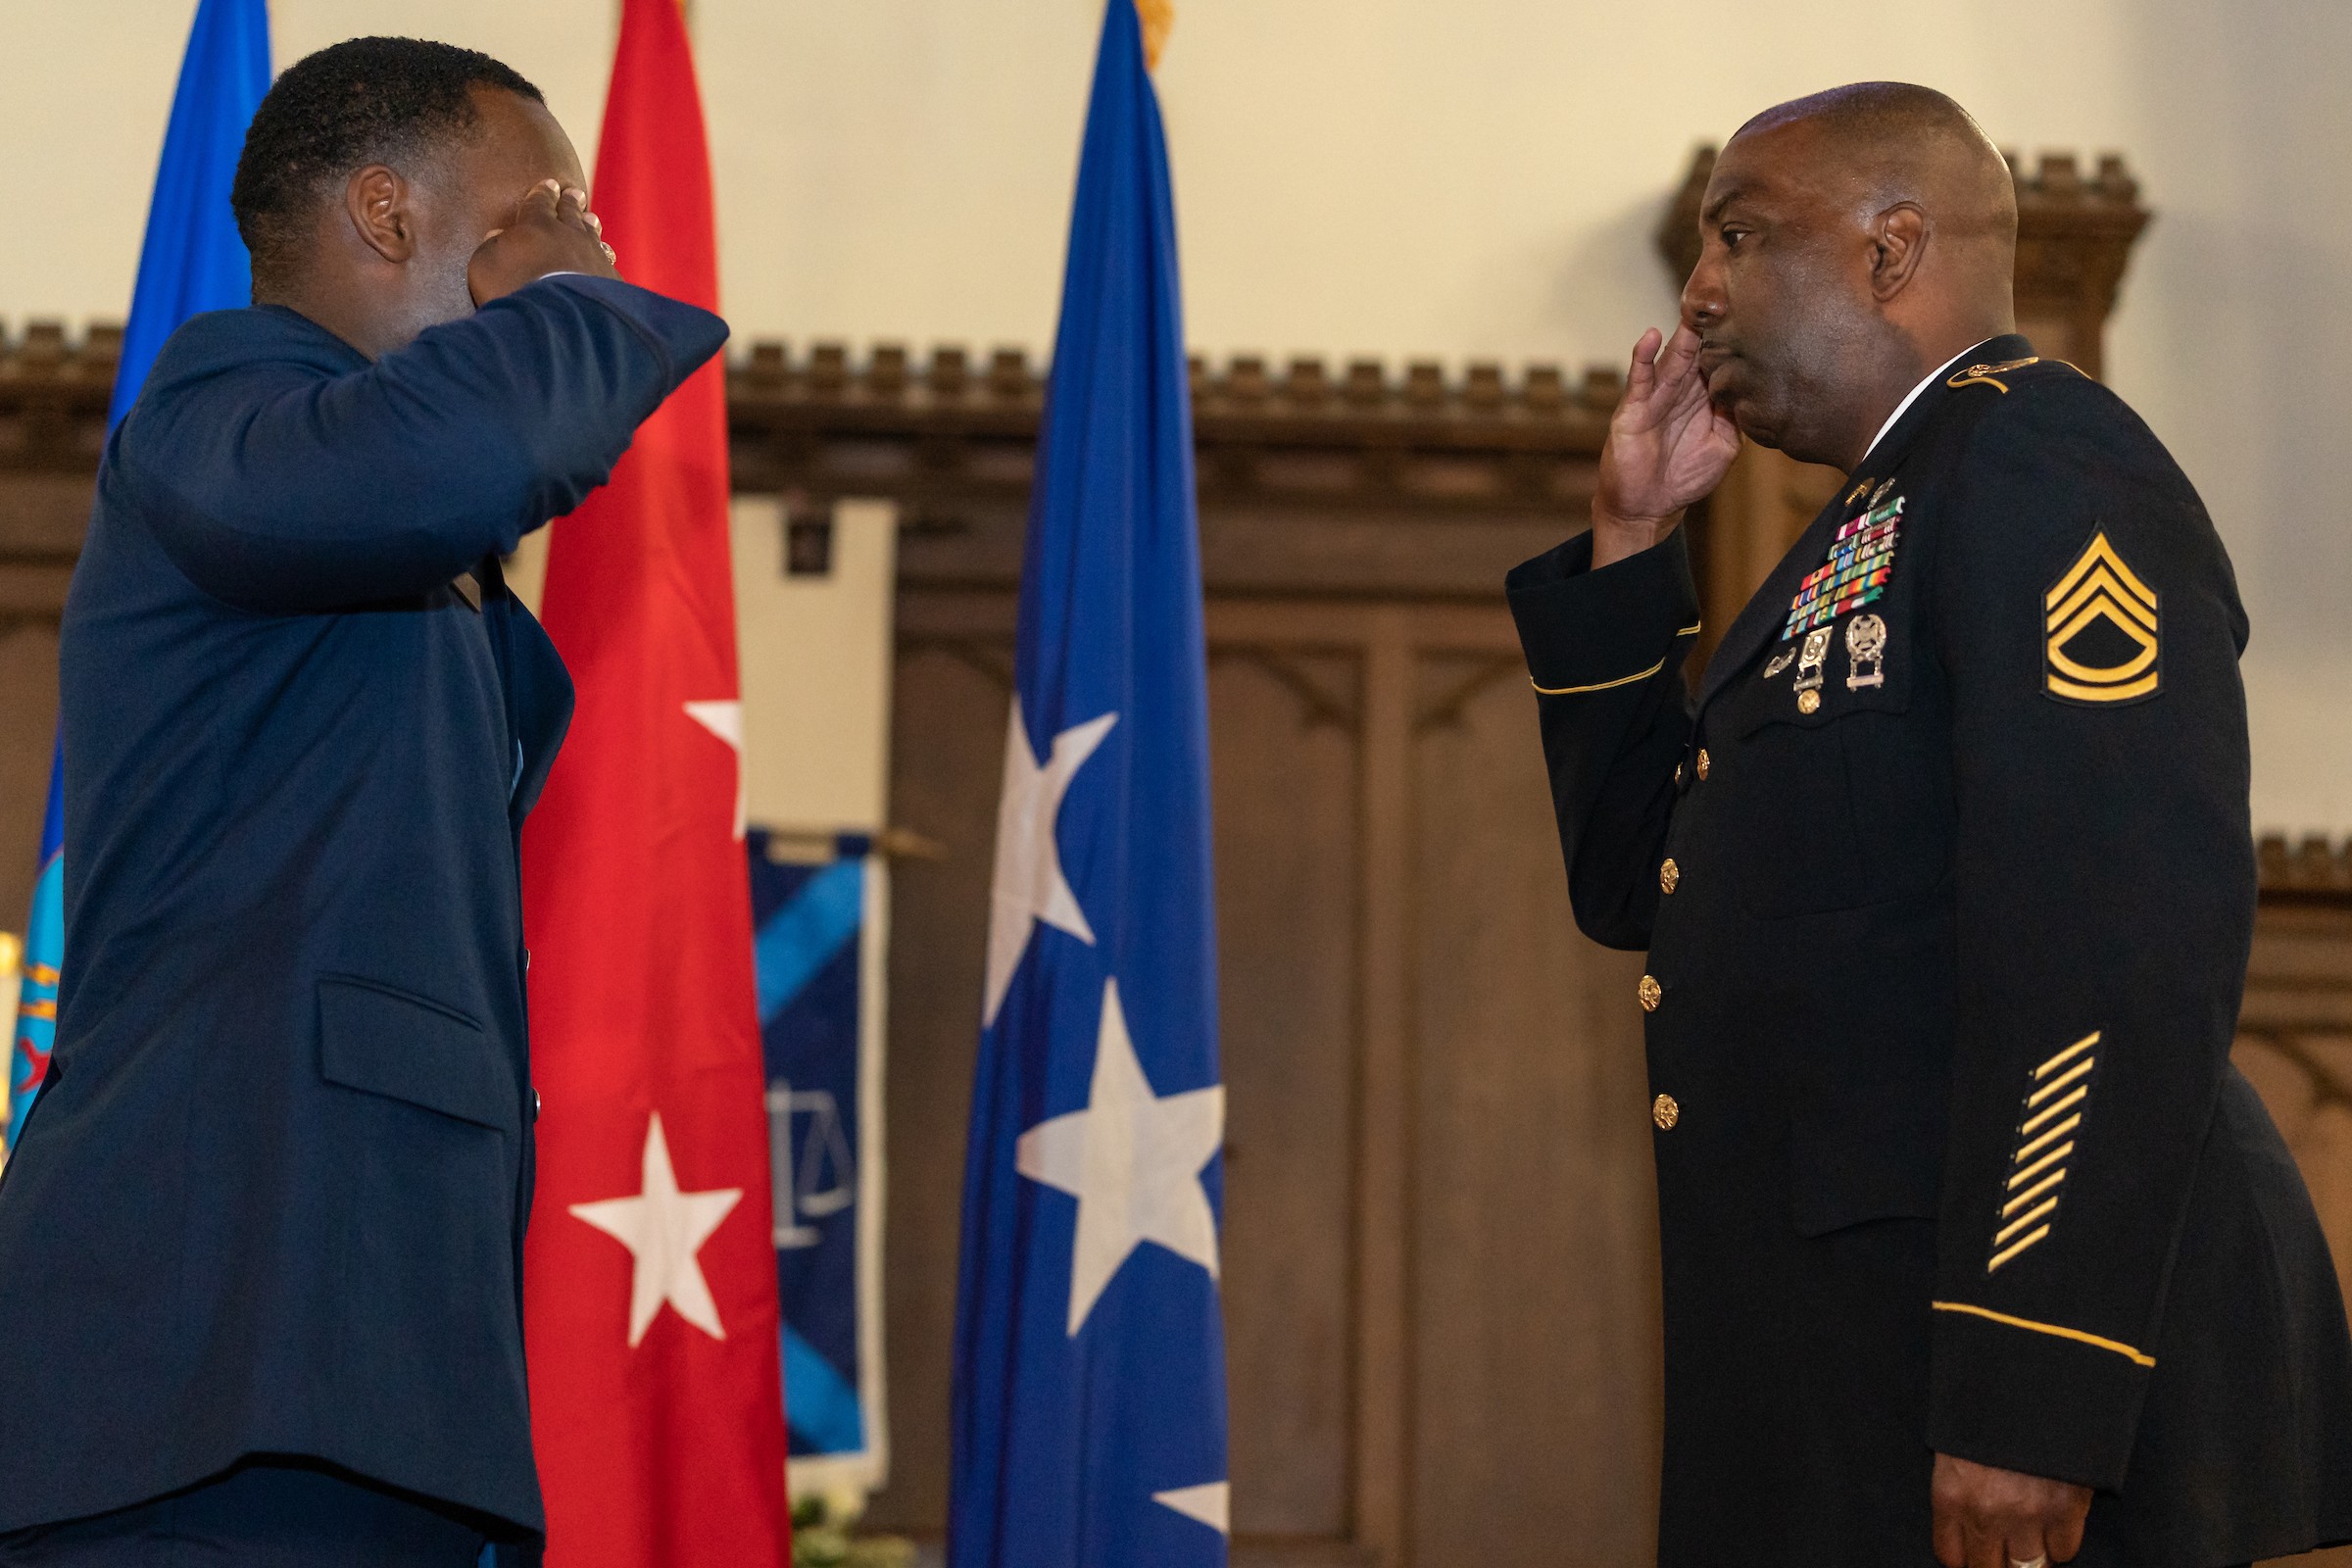 do medal of honor winners get saluted by active duty